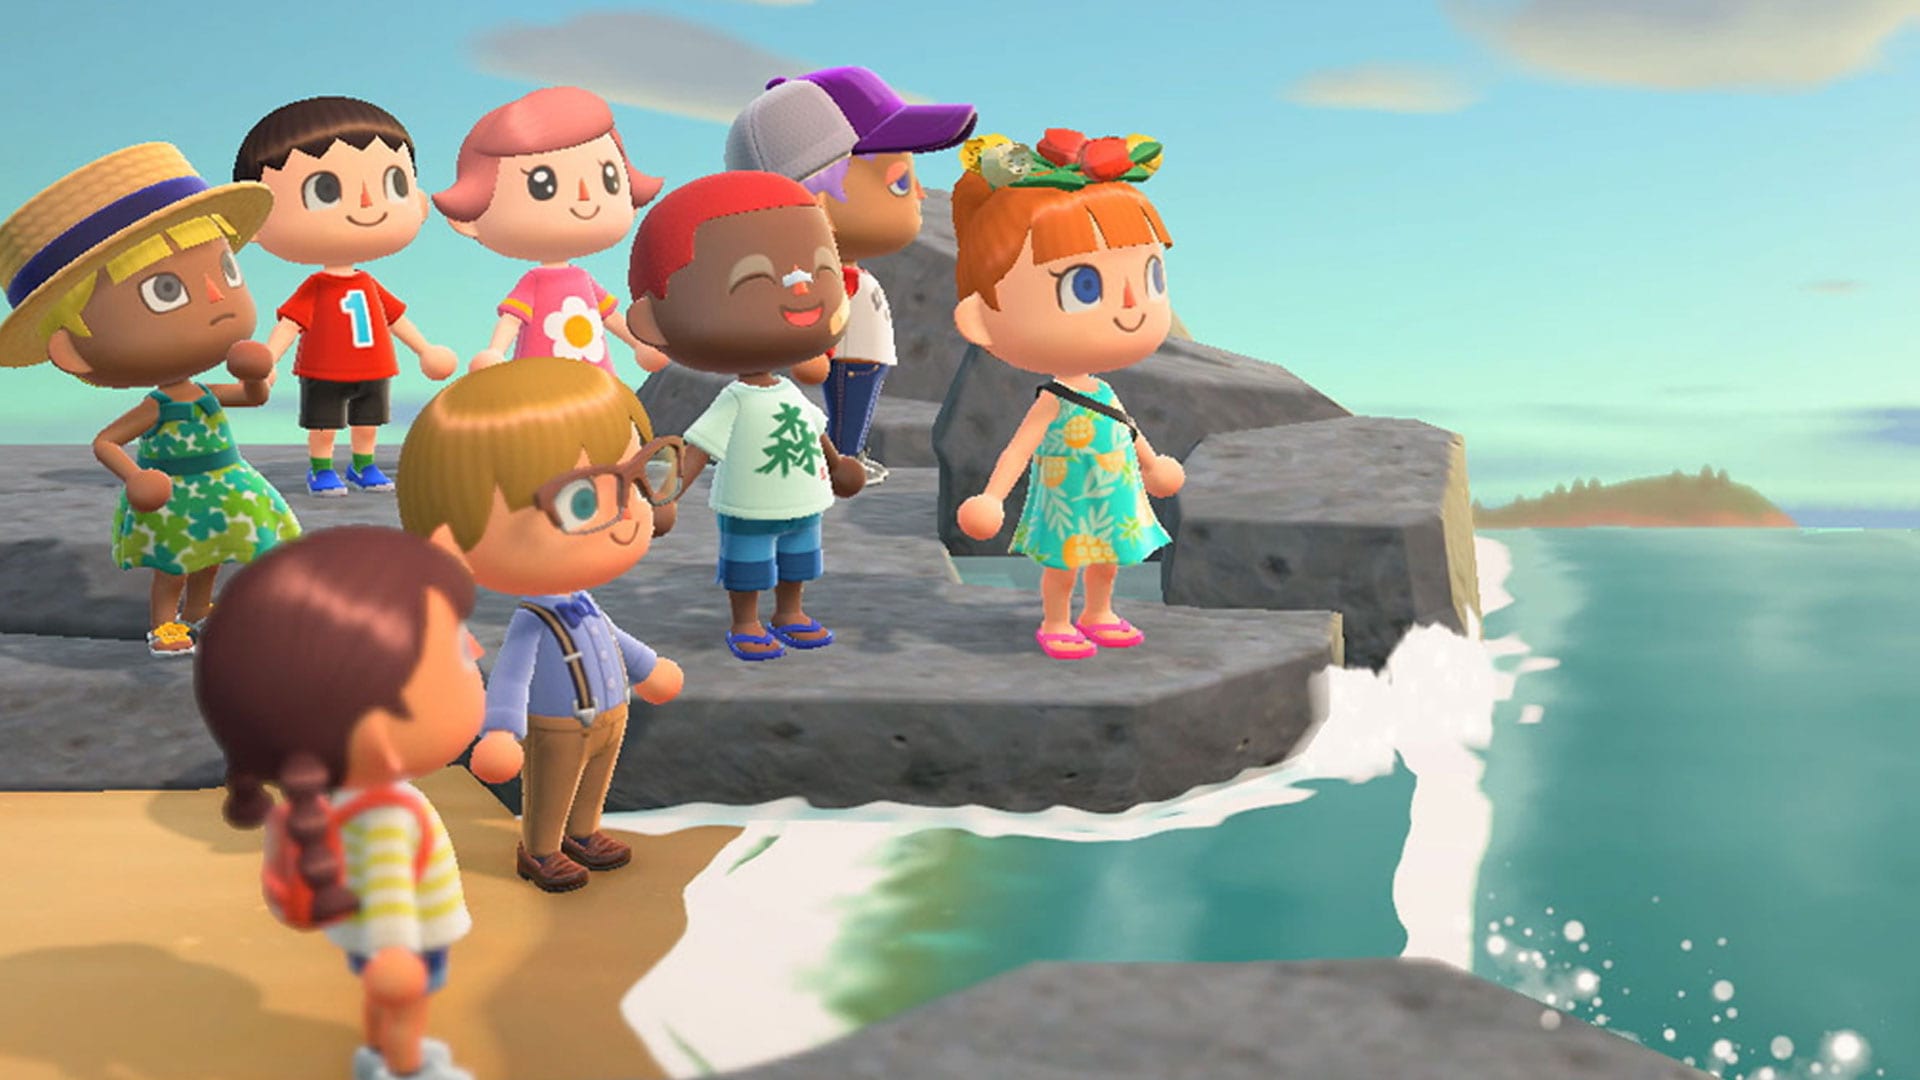 Animal Crossing New Horizons: How to Find Celeste